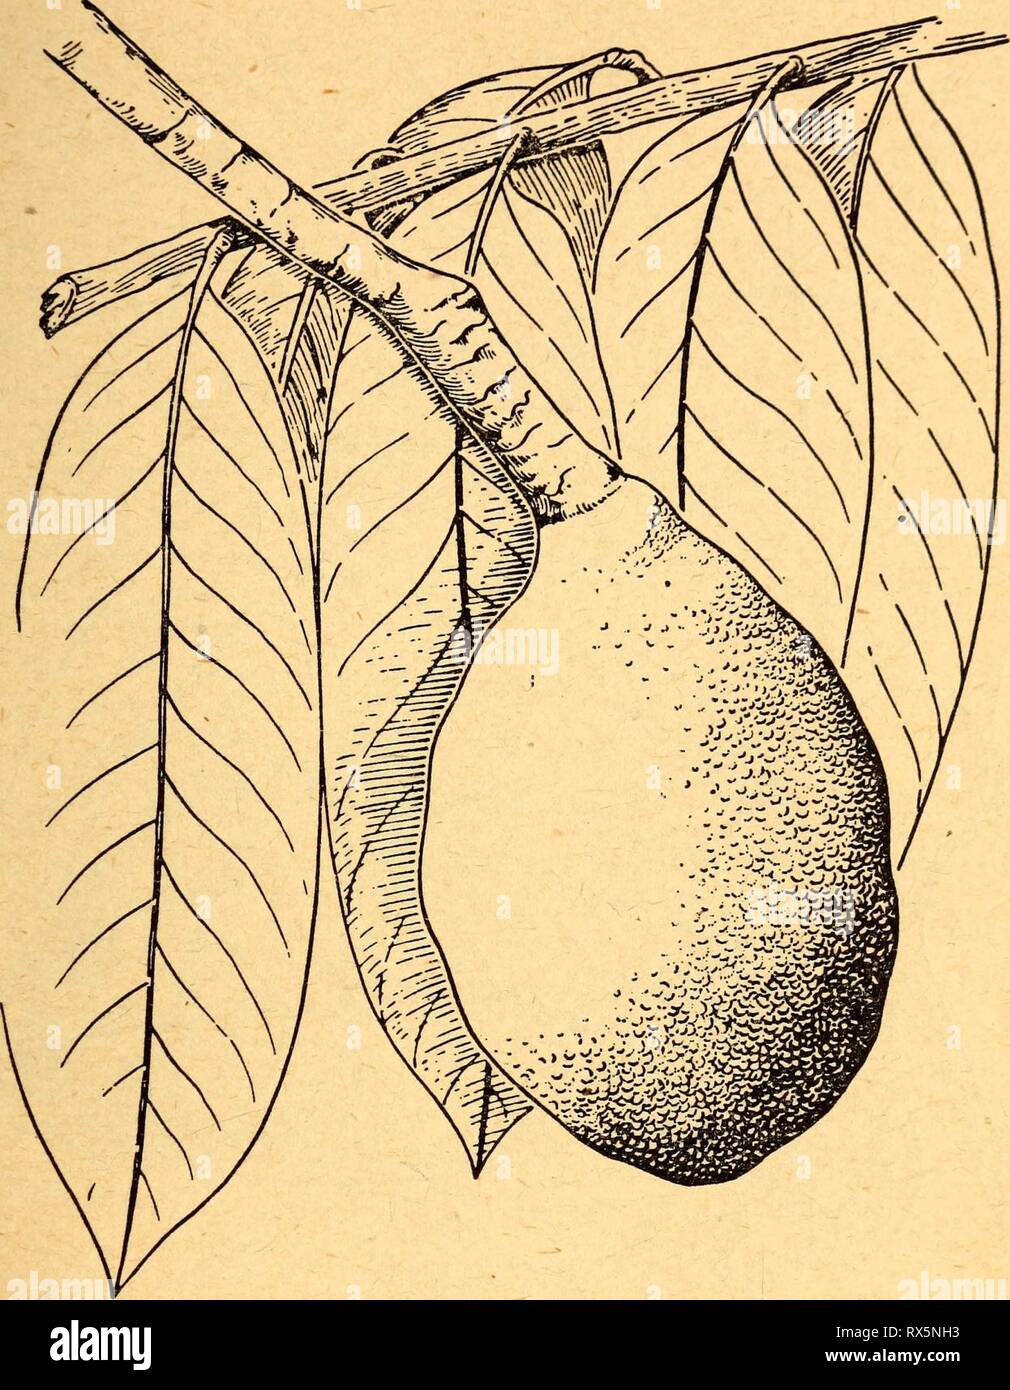 Edible and poisonous plants of Edible and poisonous plants of the Caribbean region ediblepoisonousp00dahl Year: 1944  39   30. SUNZAPOTE Licania platypus This fruit is poor in flavor and seldom eaten except when no other fruit is available. The tall, handsome tree grows in profusion in the lowlands of Central America. The elongated young leaves are red or purple, the fruit is very large, with a rough, brownish rind, and the stringy flesh is deep yellow, juicy and sweet. Other names for the sunzapote are sunza, SunganOy and sangre (Costa Rica). Stock Photo